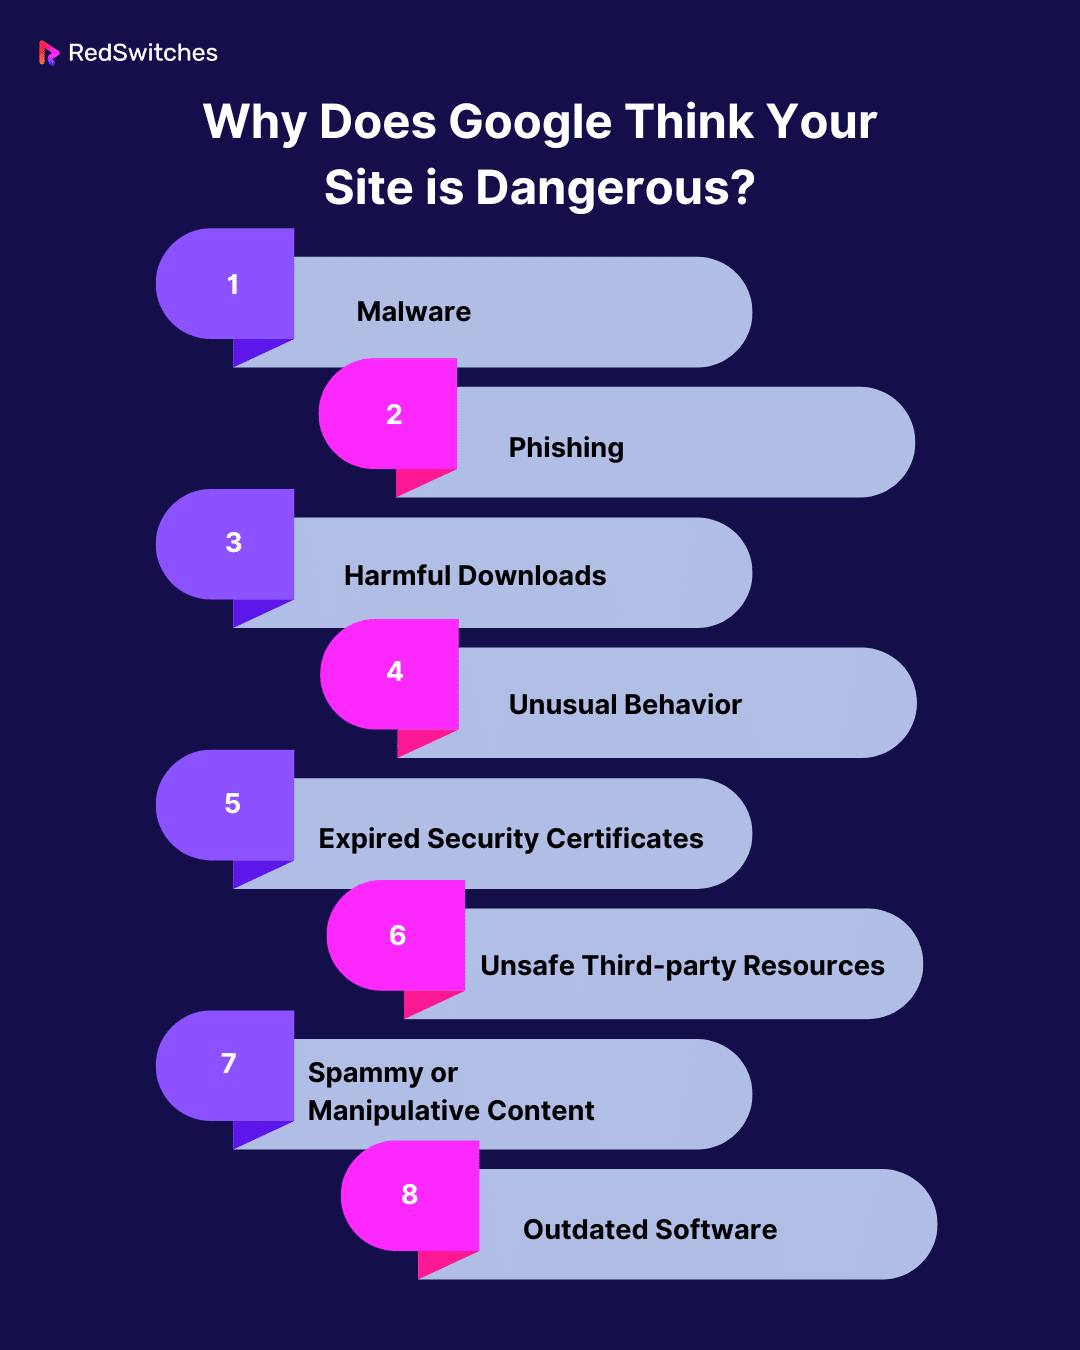 Why Does Google Think Your Site is Dangerous